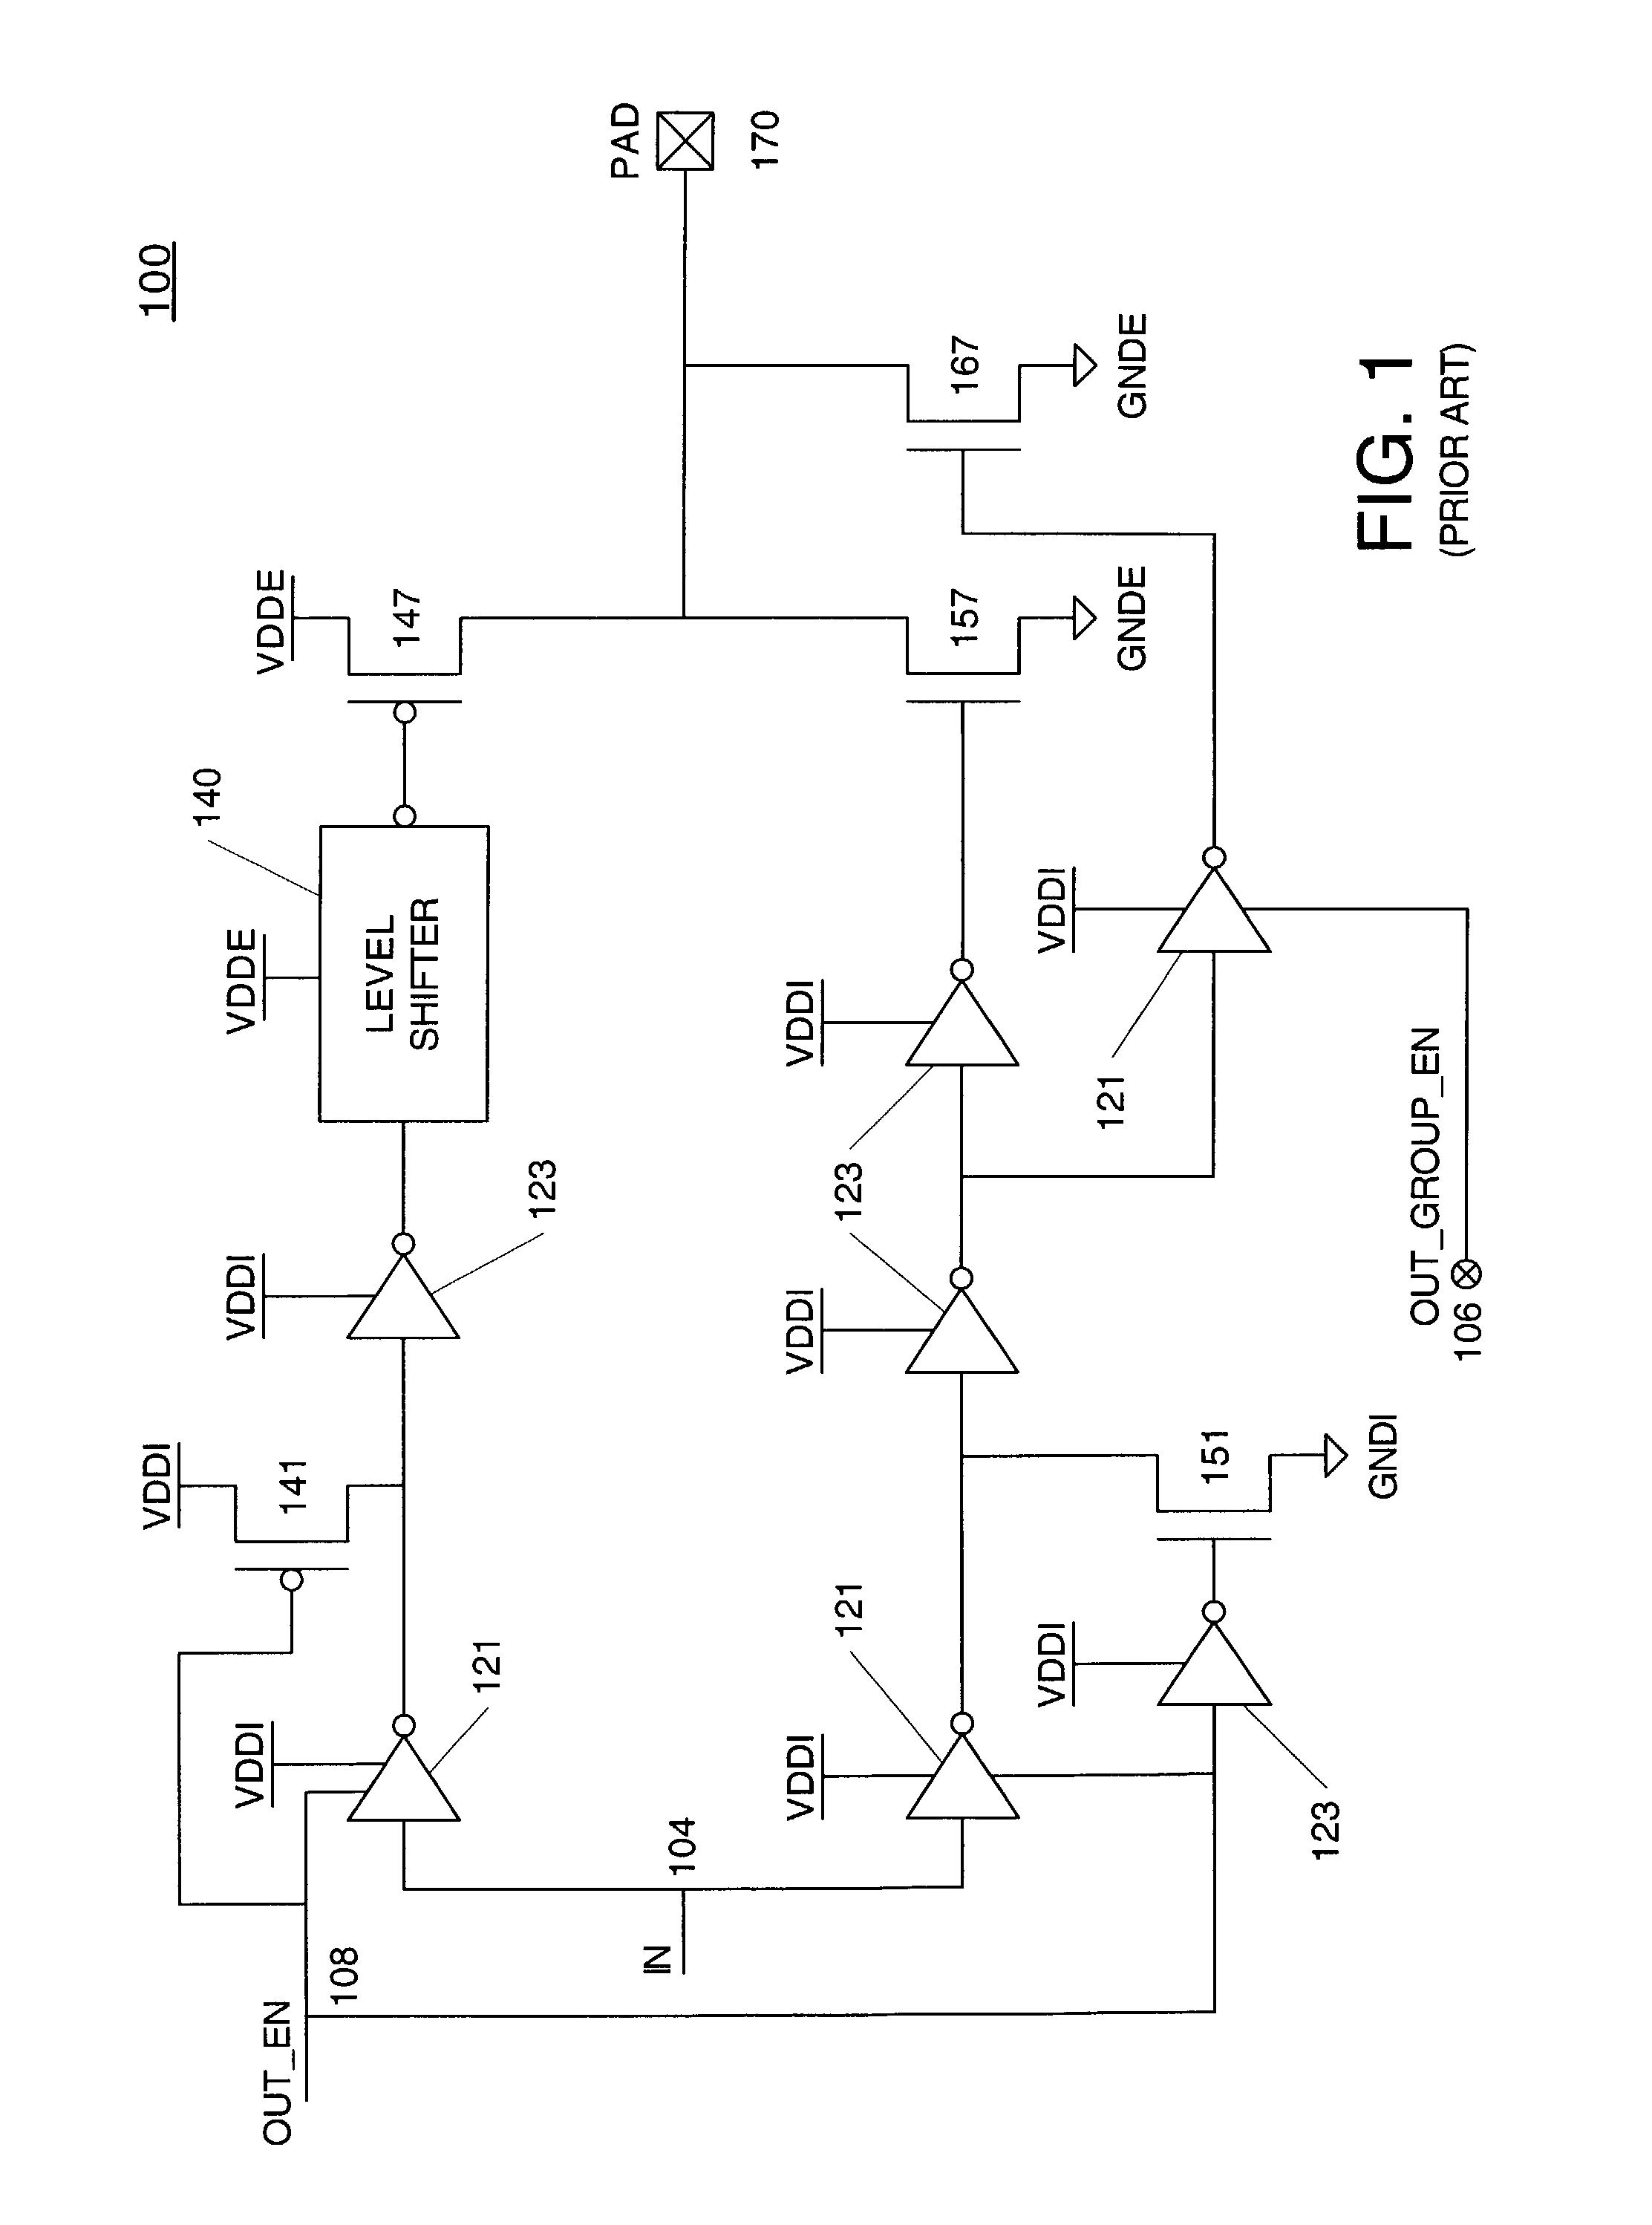 Auto-detect level shifter for multiple output voltage standards